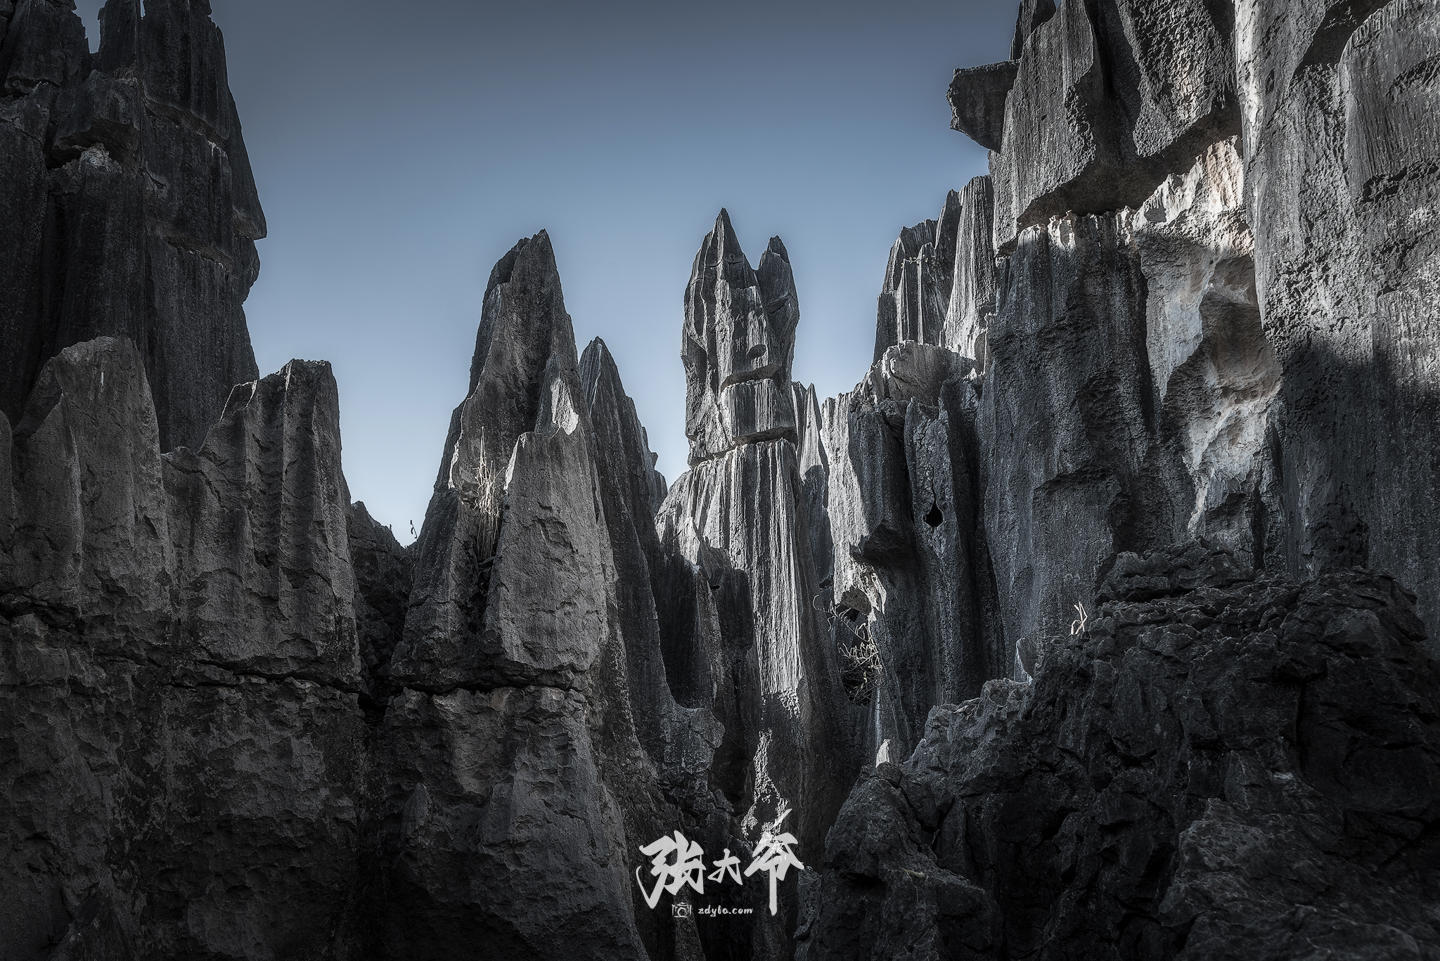 The God of Stone Forest